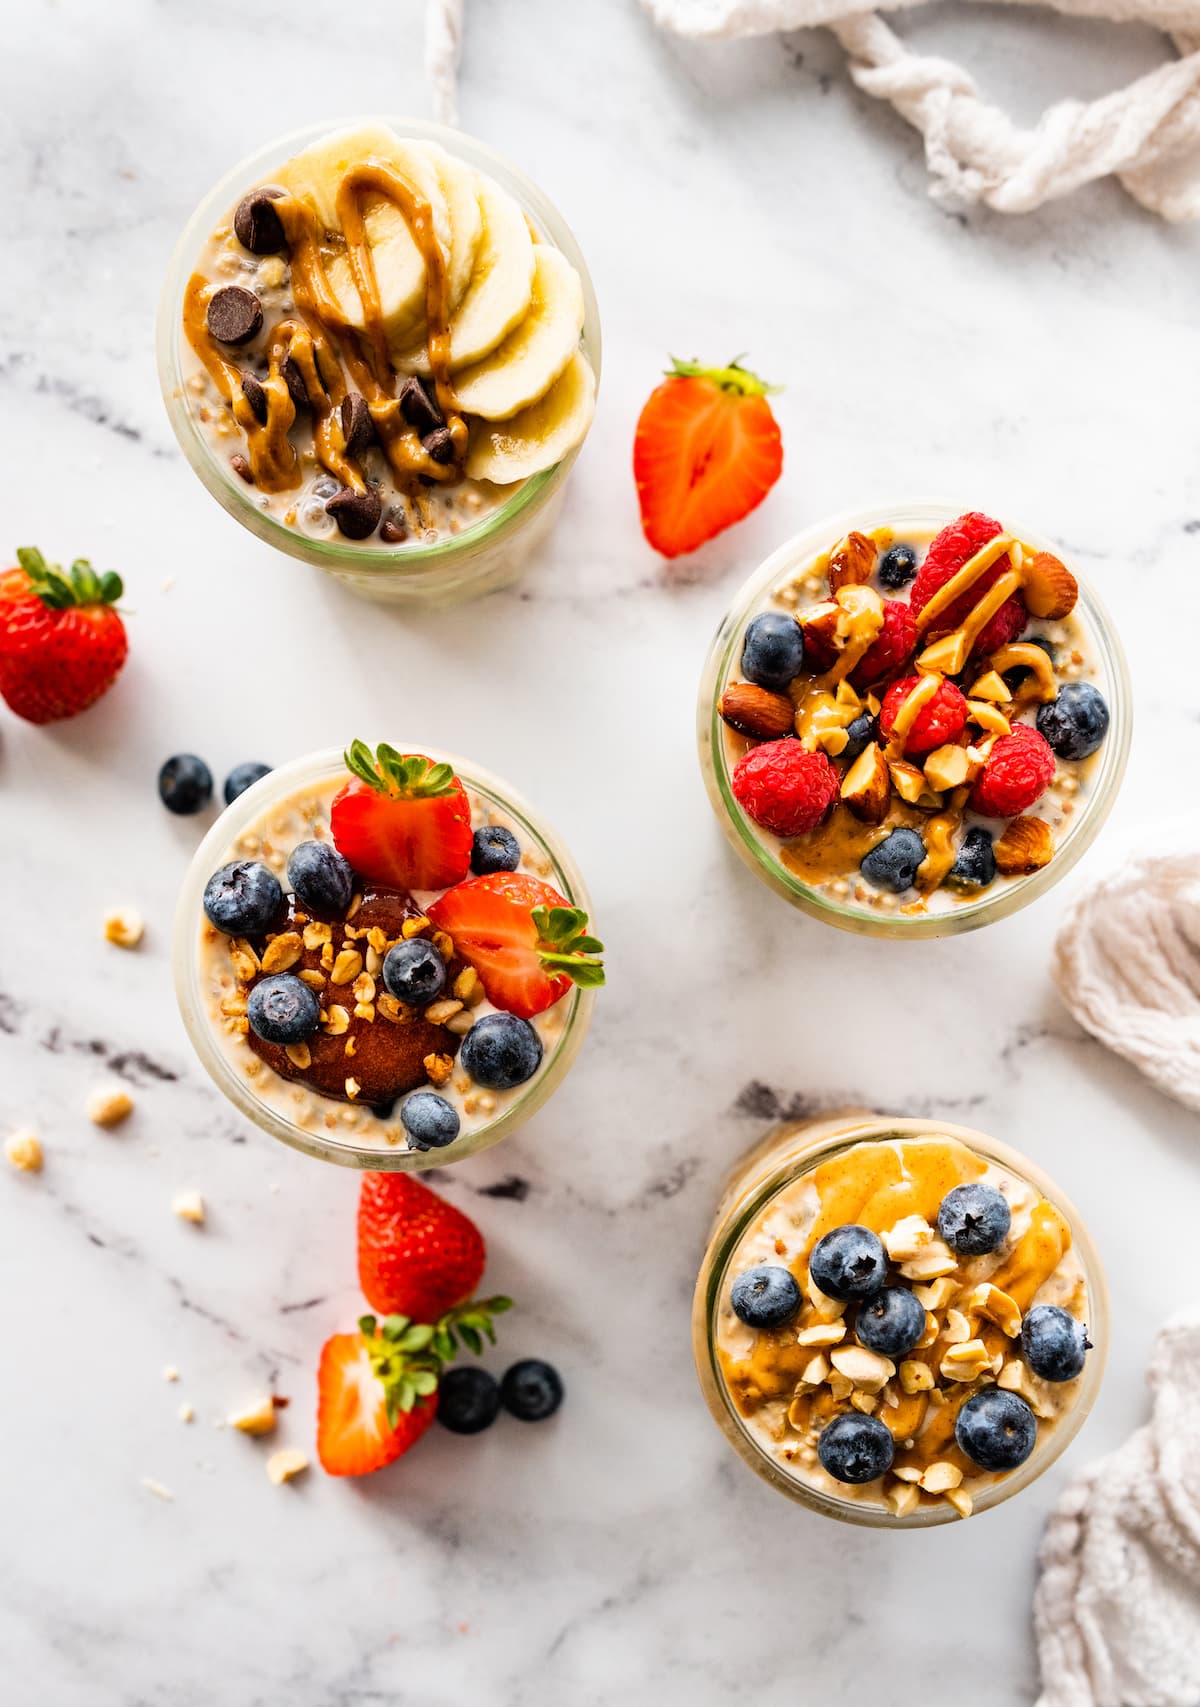 Four glass jars with overnight oats. The oats are topped with fresh berries and nut butter.